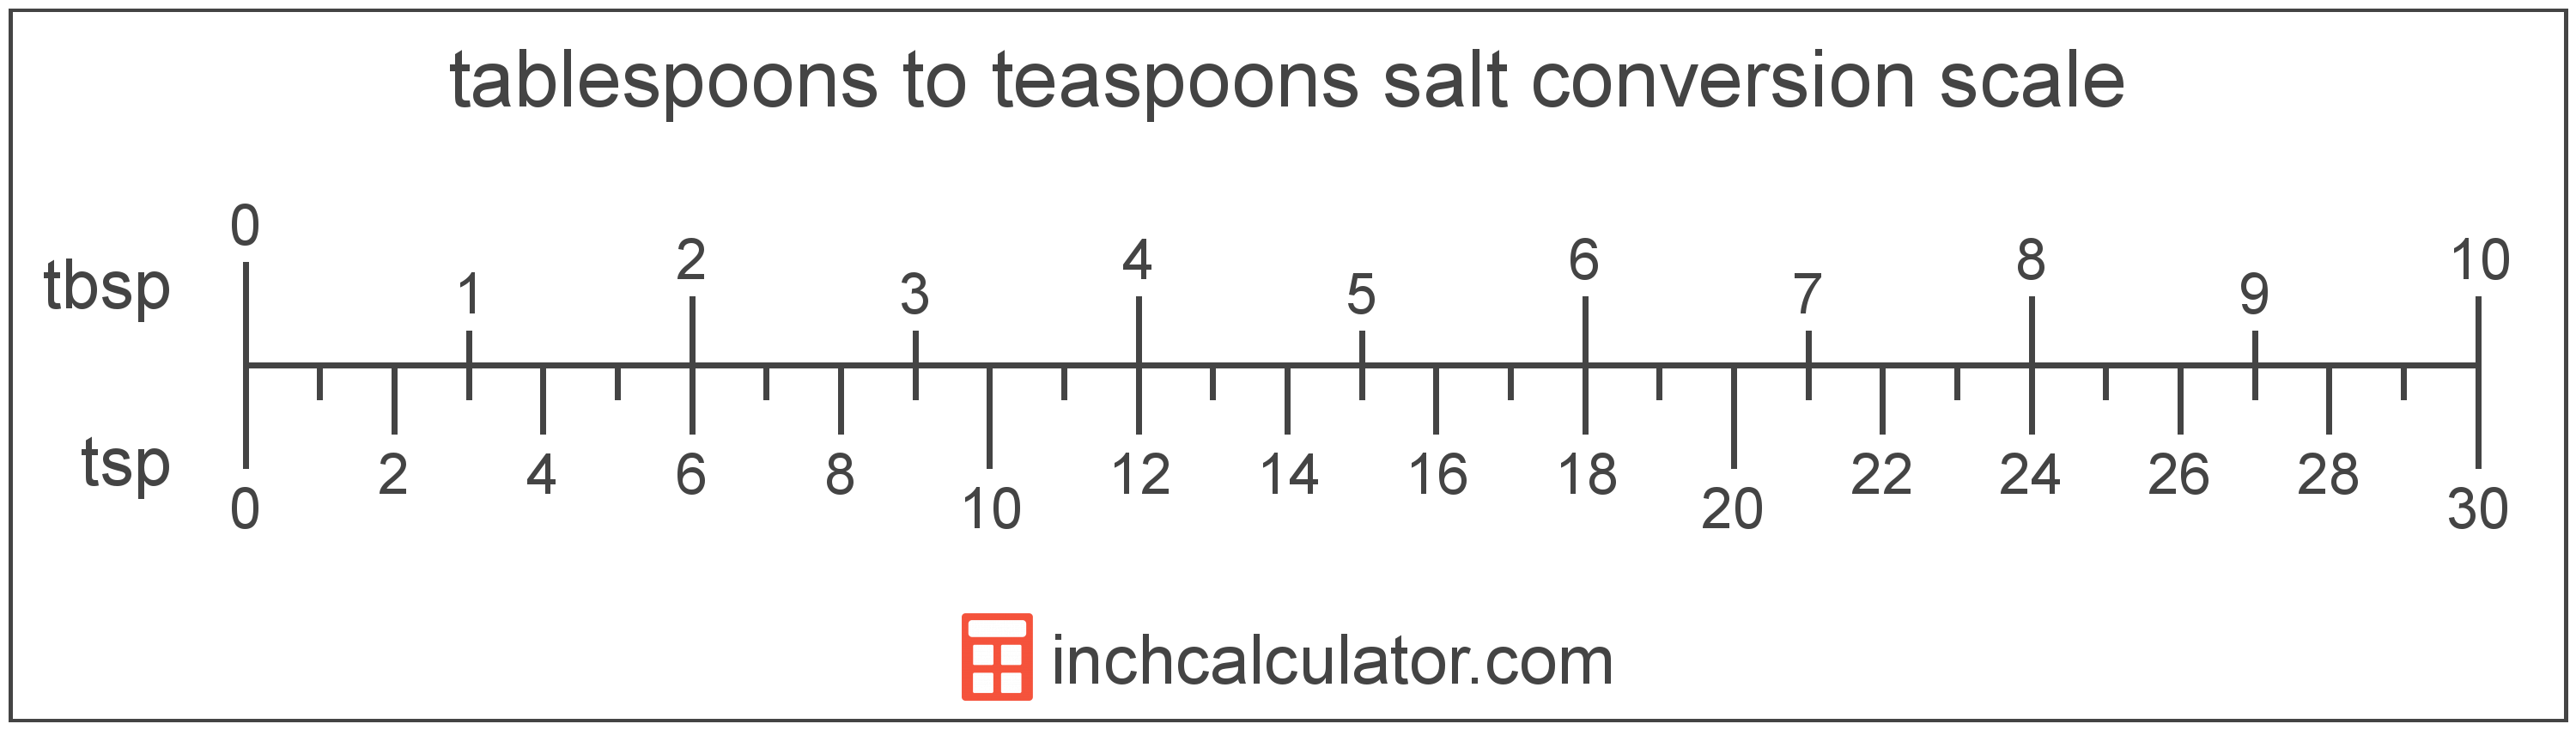 conversion scale showing tablespoons and equivalent teaspoons amount of salt values